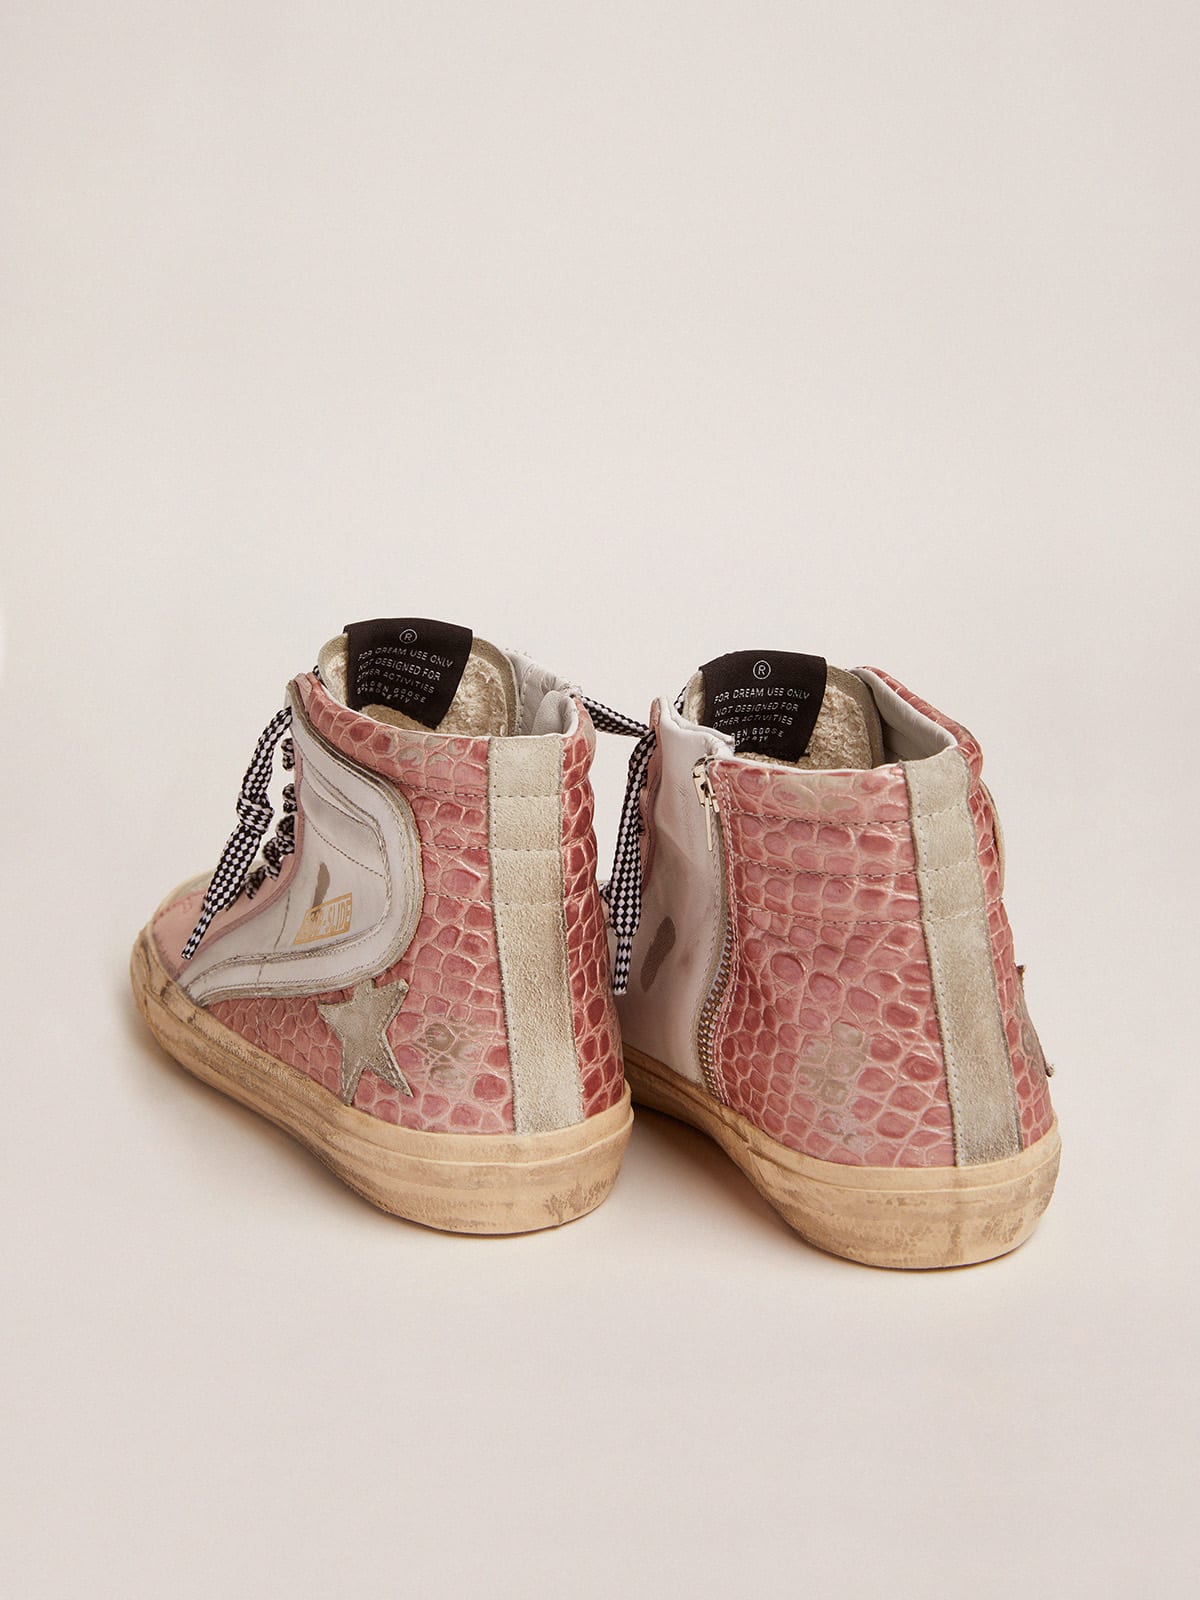 Slide sneakers with white leather and pink crocodile-print leather upper |  Golden Goose